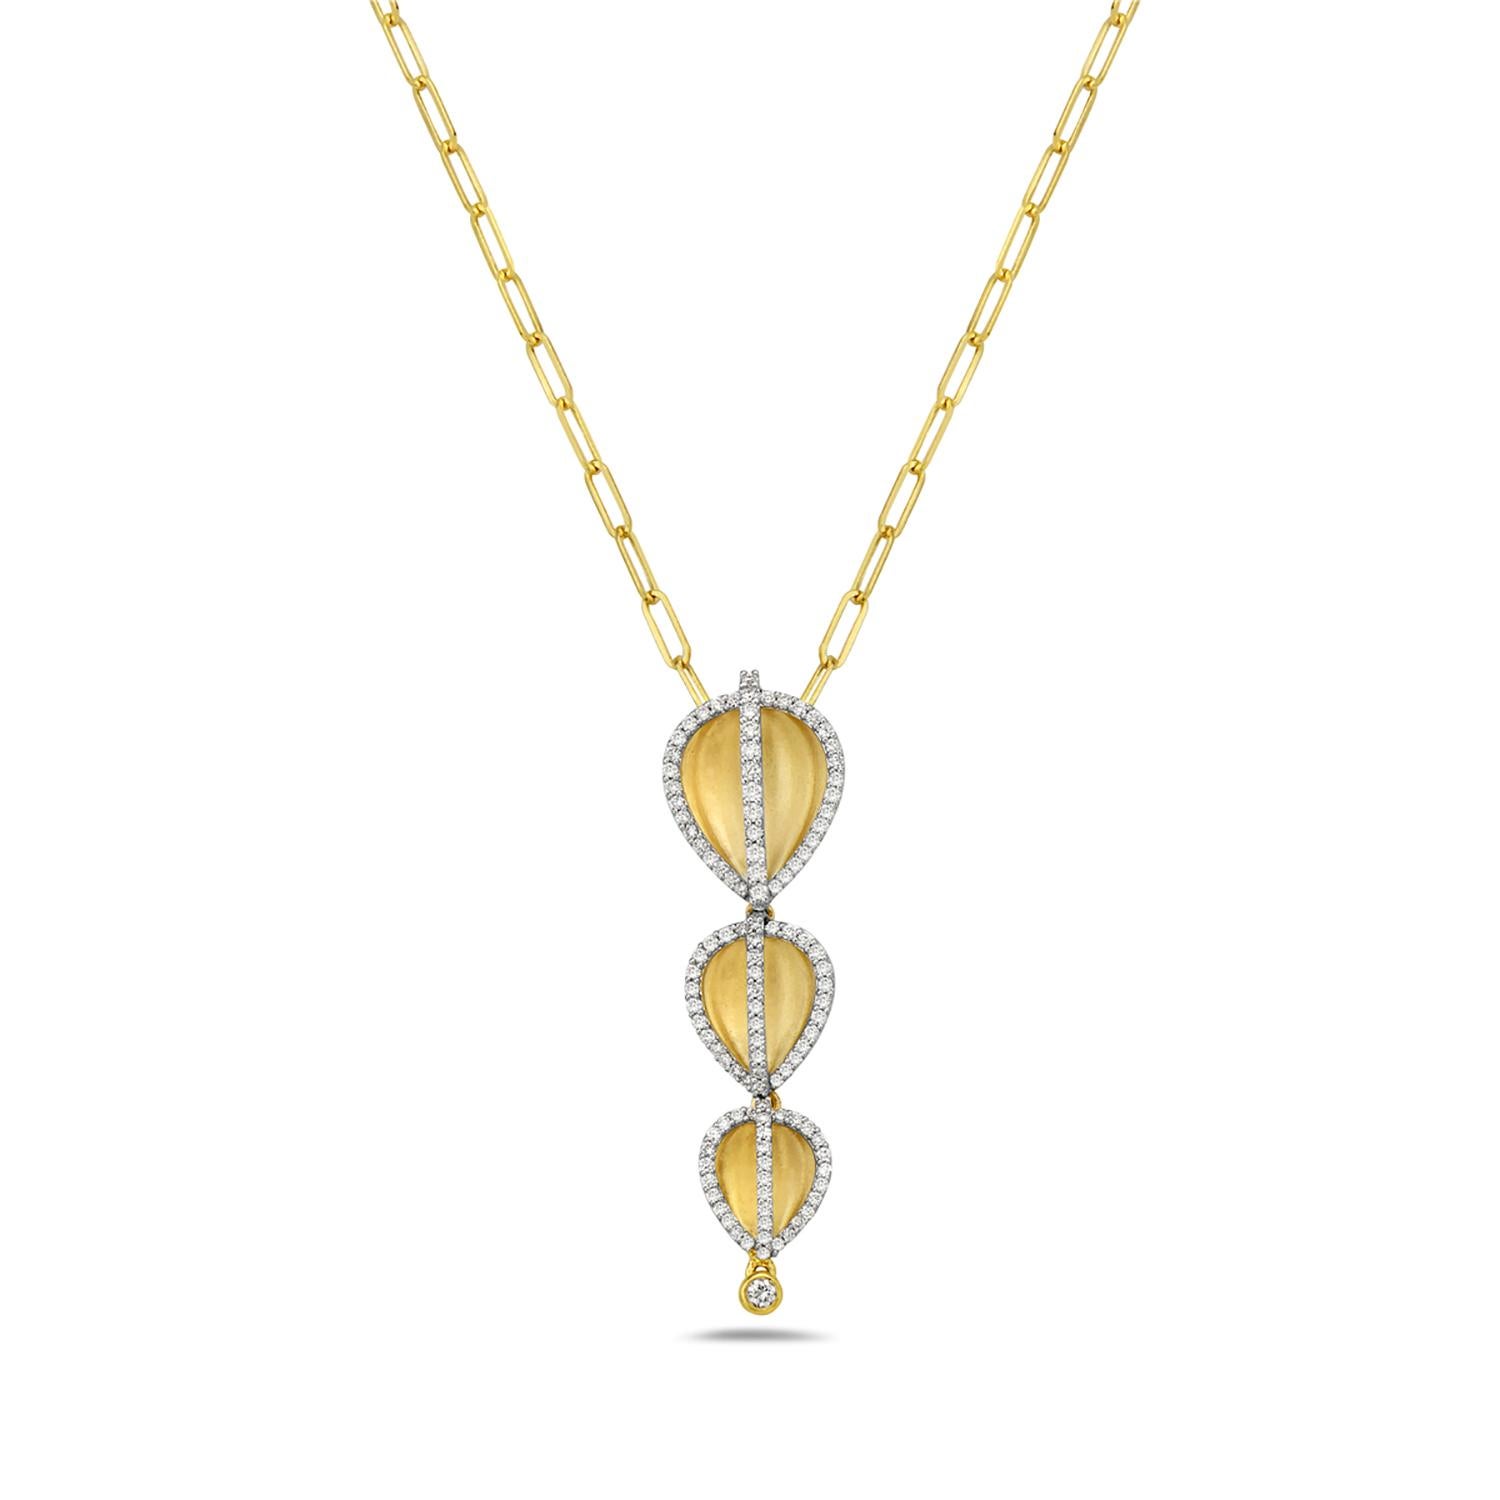 Balloon Shaped Connected Pendant with Pave Diamonds Made in 14k Yellow Gold In New Condition For Sale In New York, NY